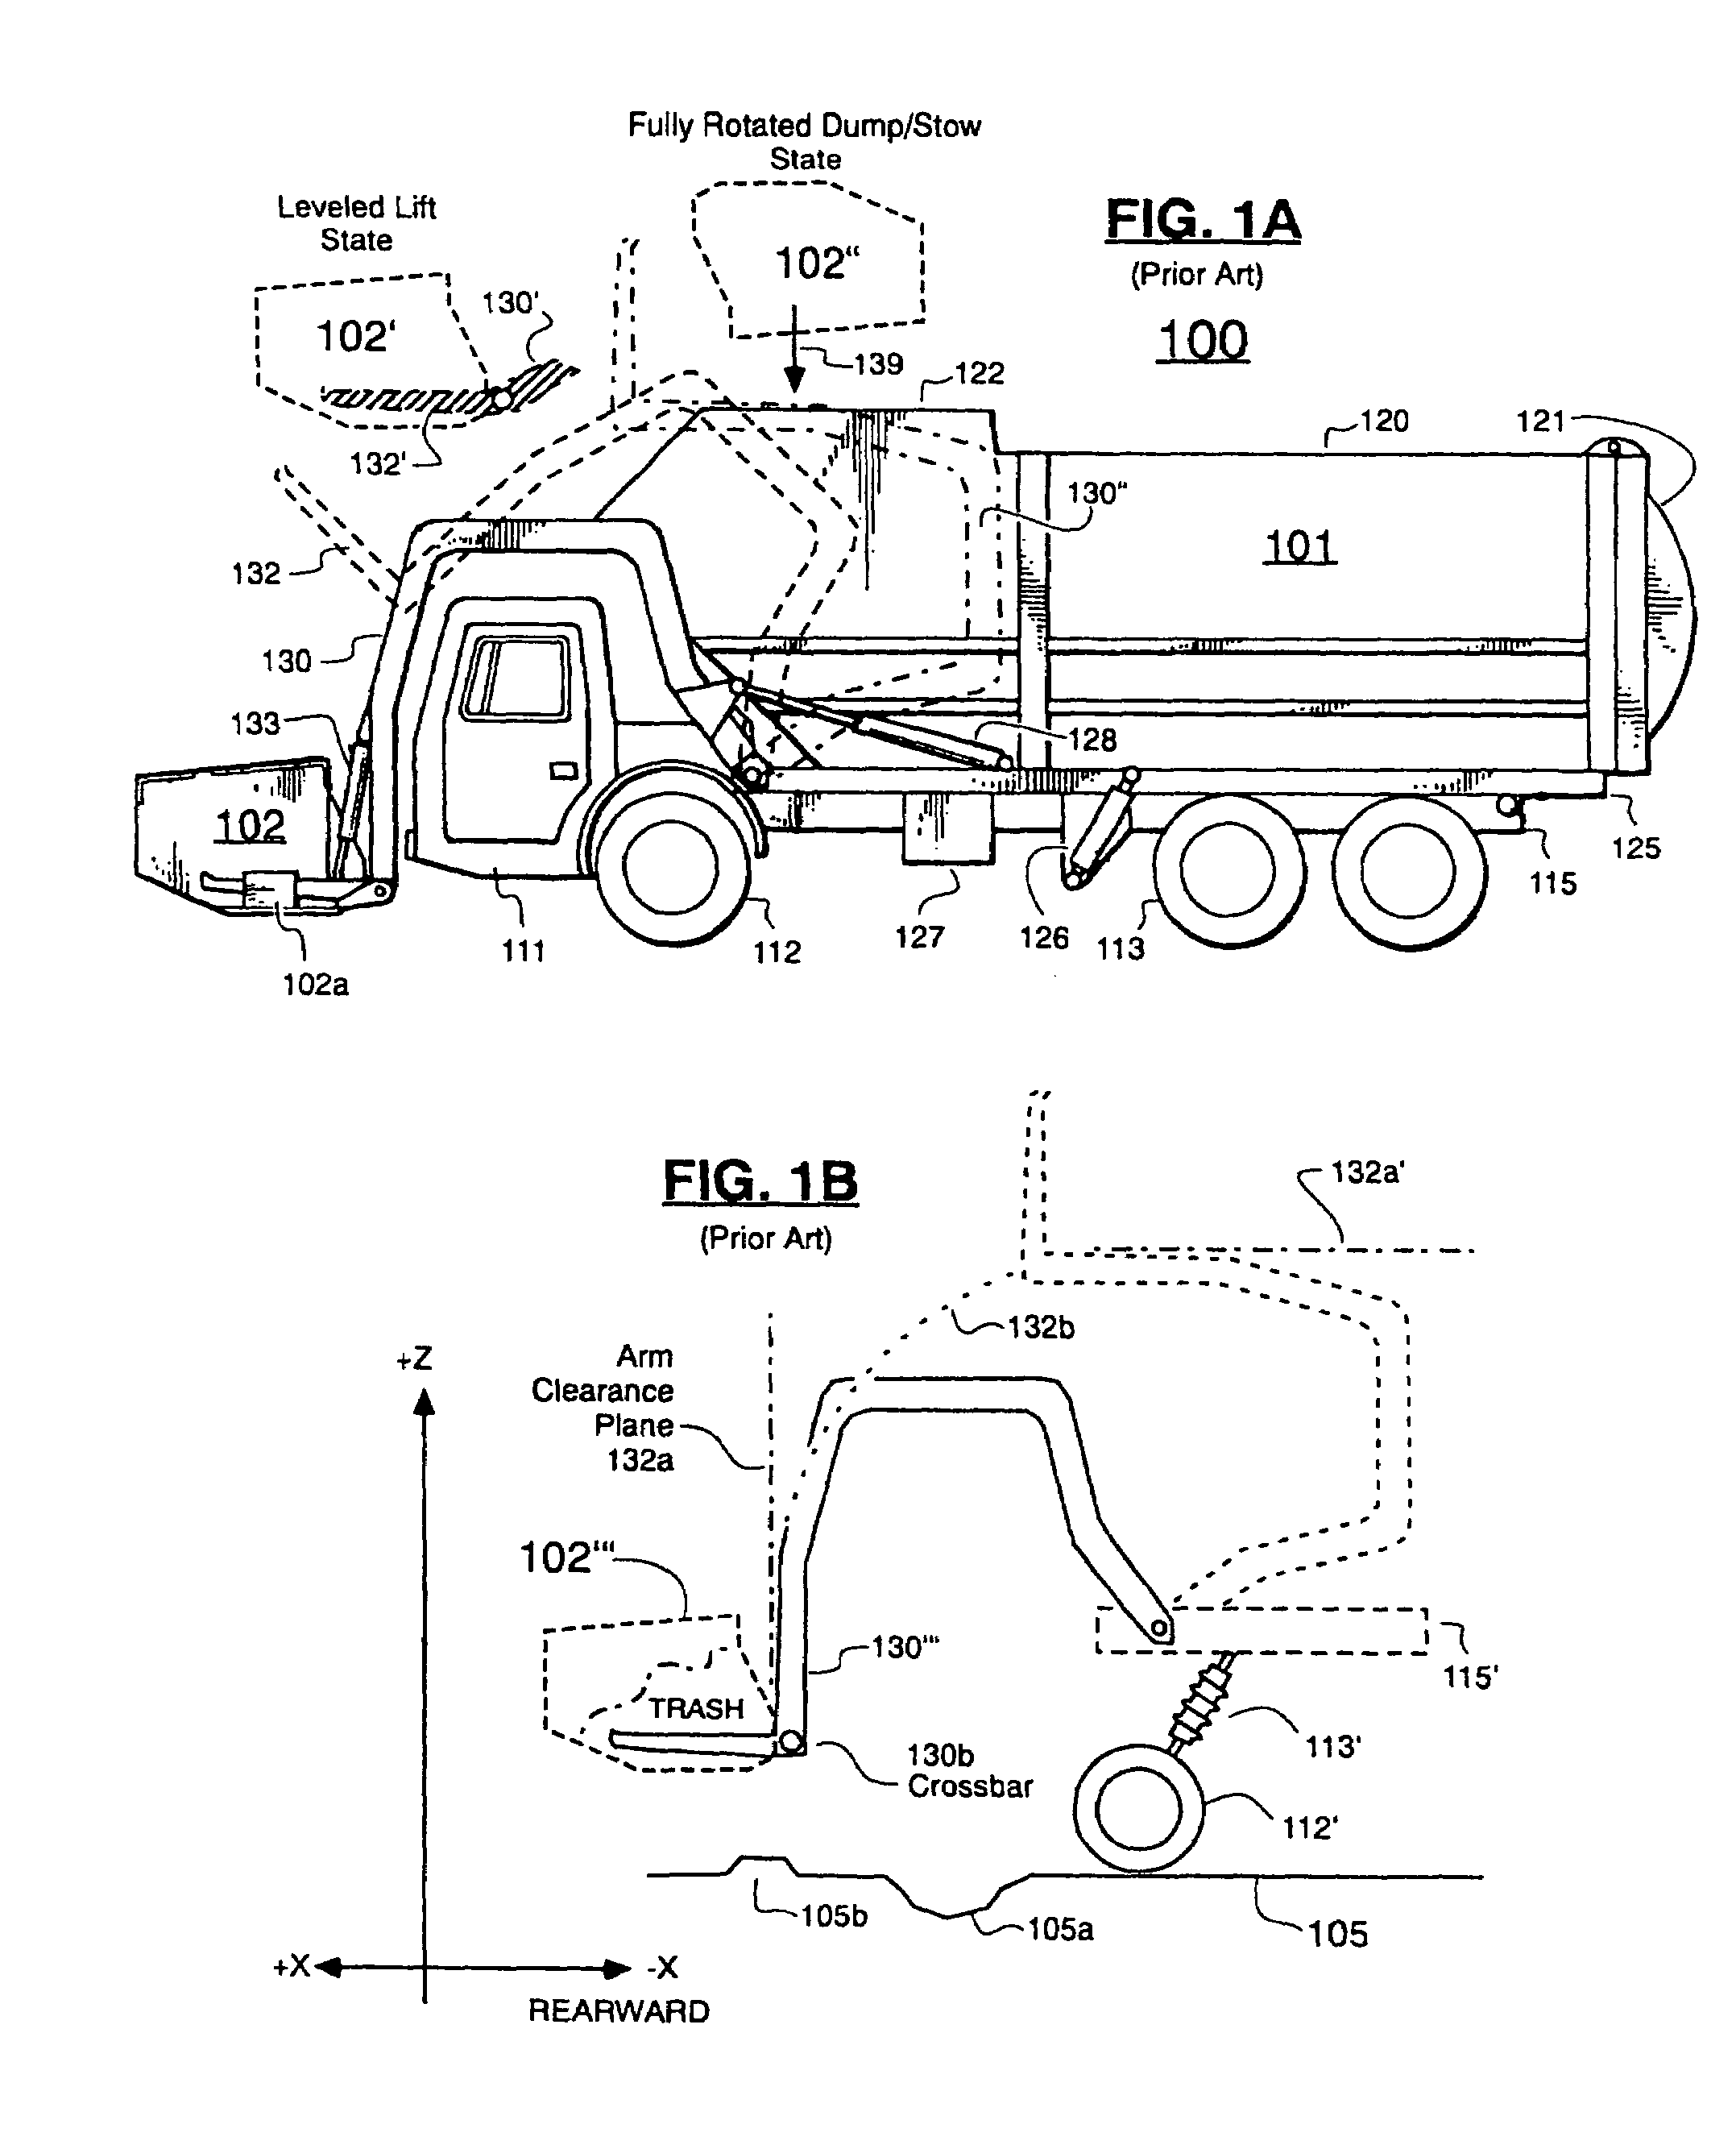 Front-loadable refuse container having side-loading robotic arm with motors and other mass mounted at rear of container and use of same with front-loading waste-hauling vehicle having hydraulic front forks or other retractably engageable lift means